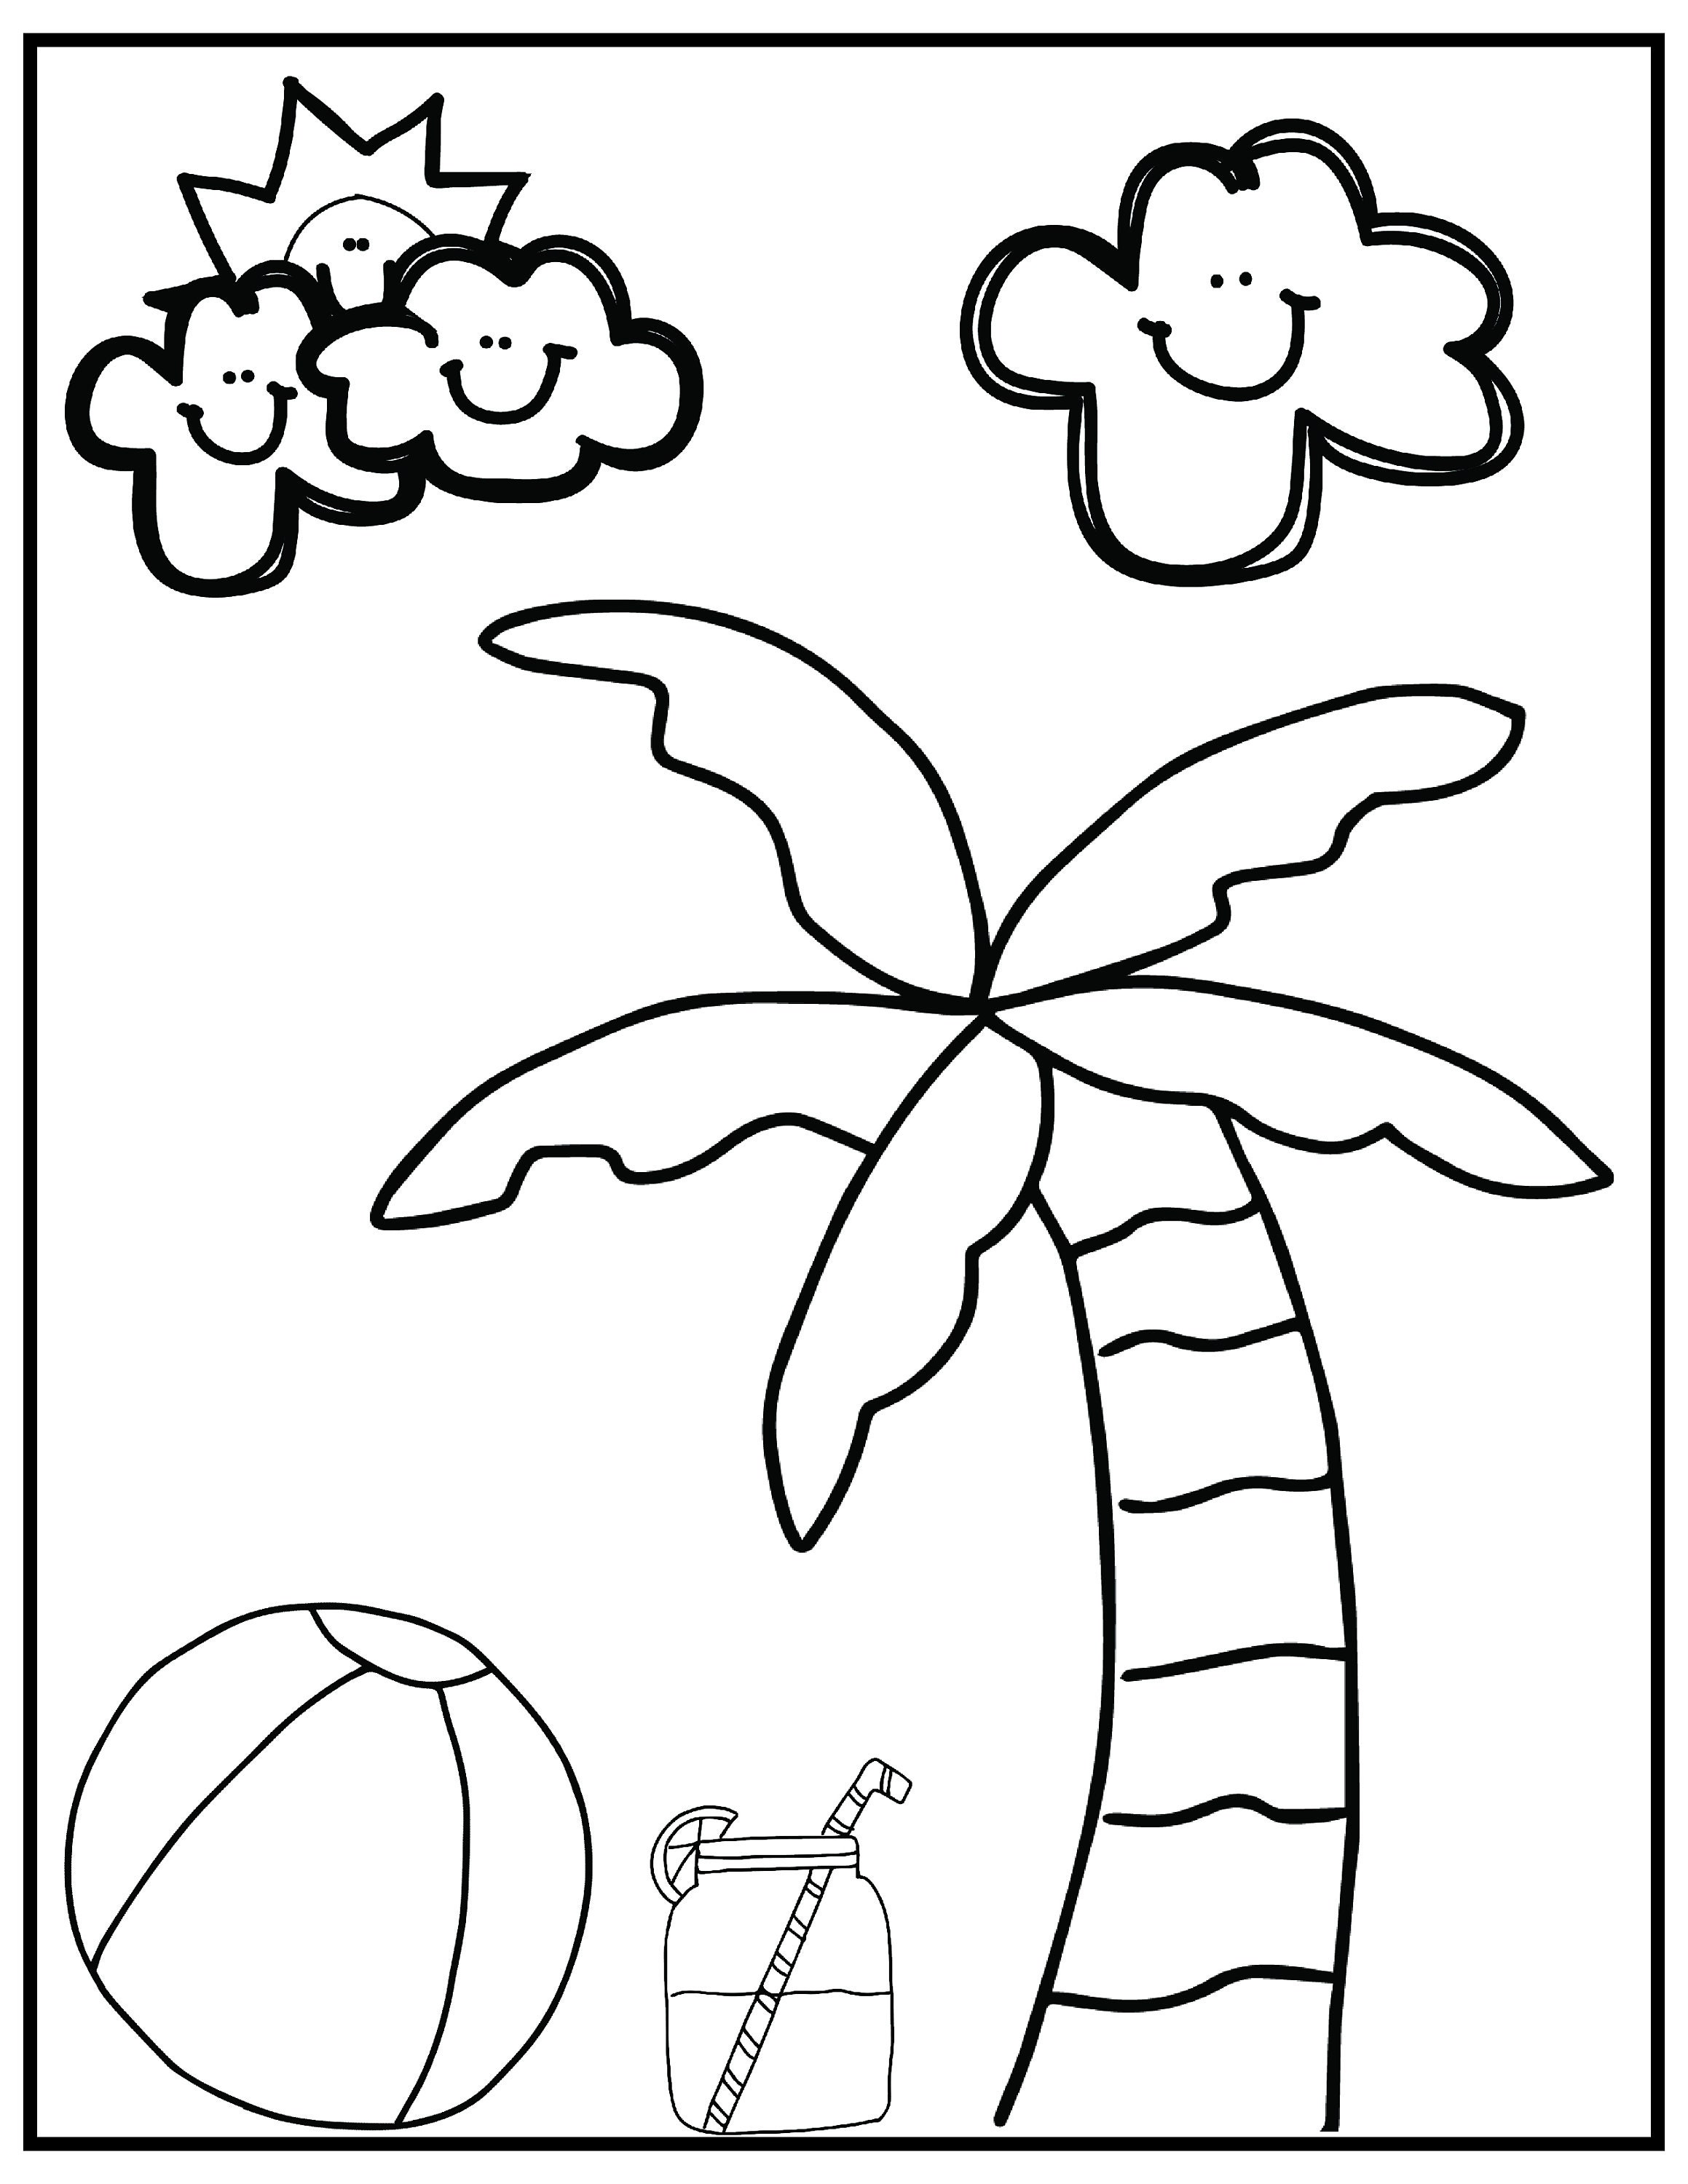 Save 60 Summer Coloring Pages Preschool Ideas 57